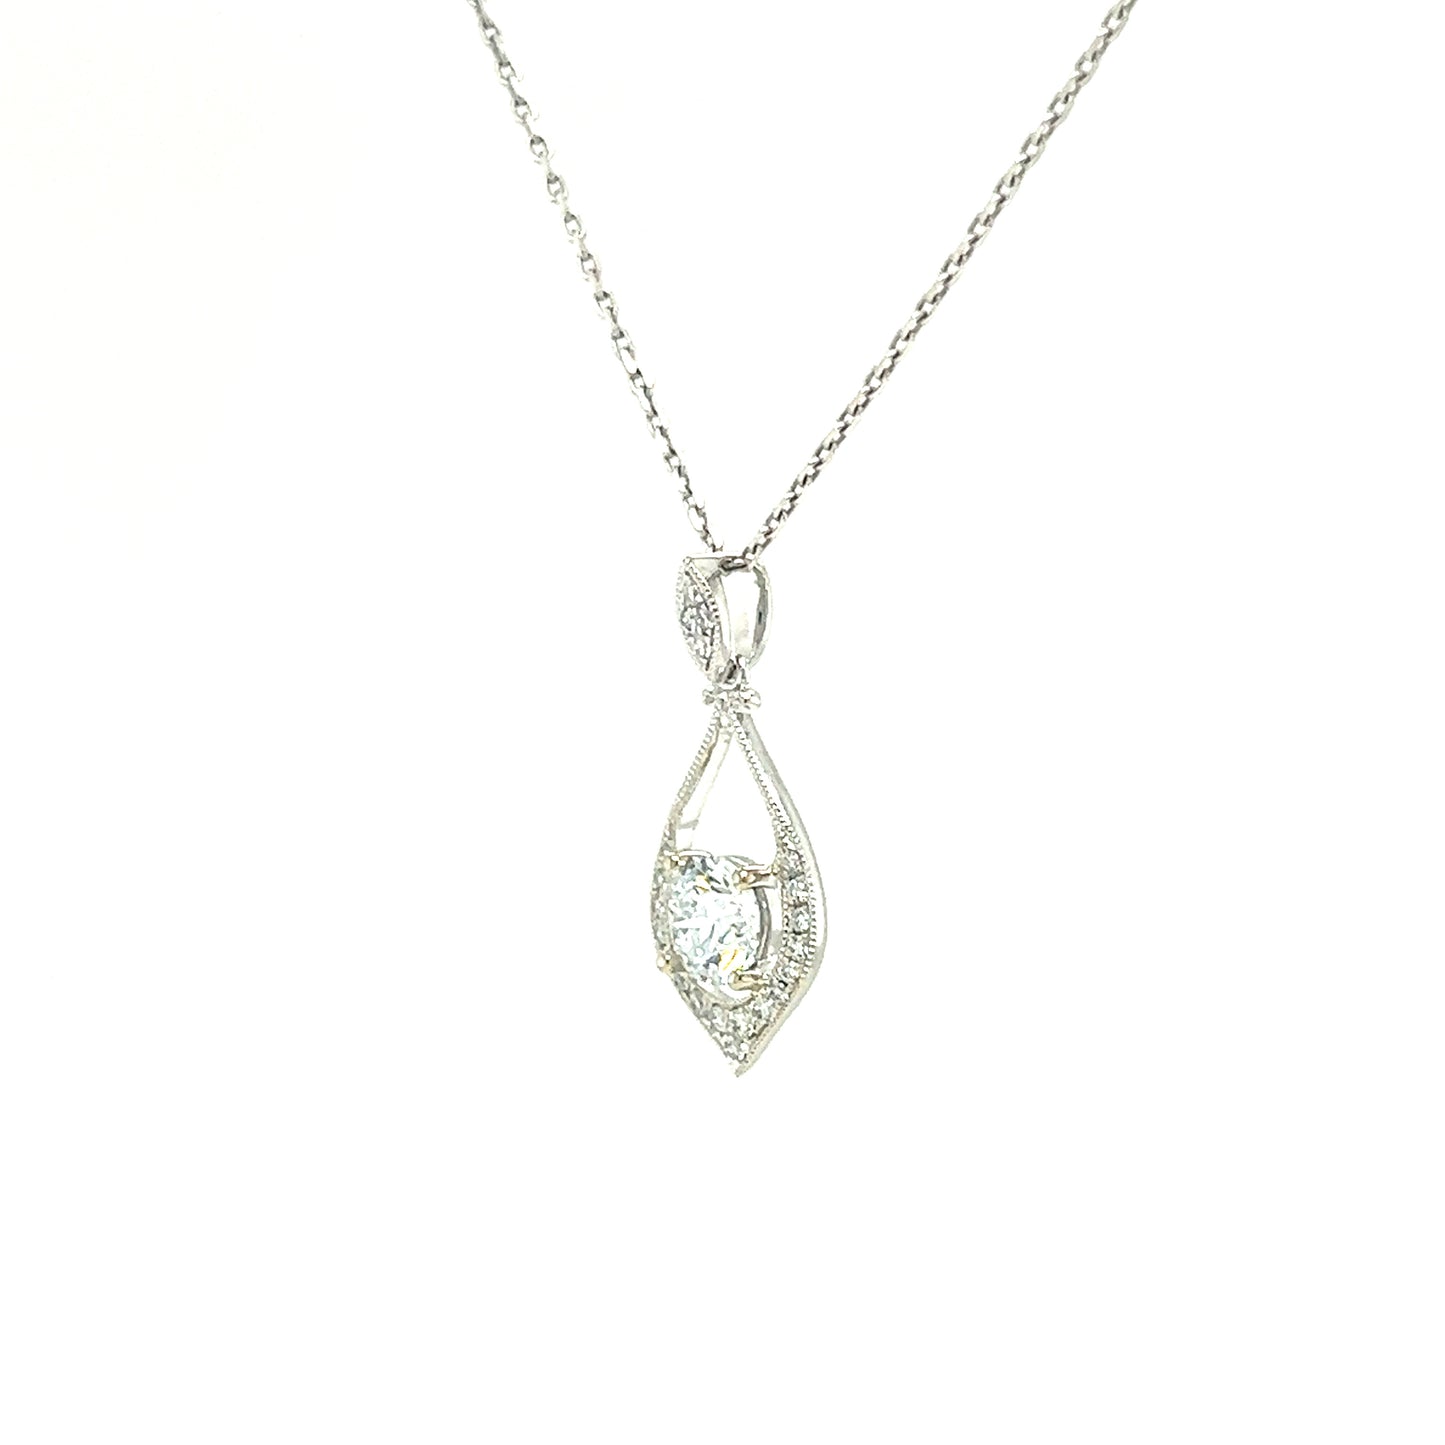 Round Diamond Pendant with 0.60ctw of Diamonds in 14K White Gold Pendant and Chain Right Side View